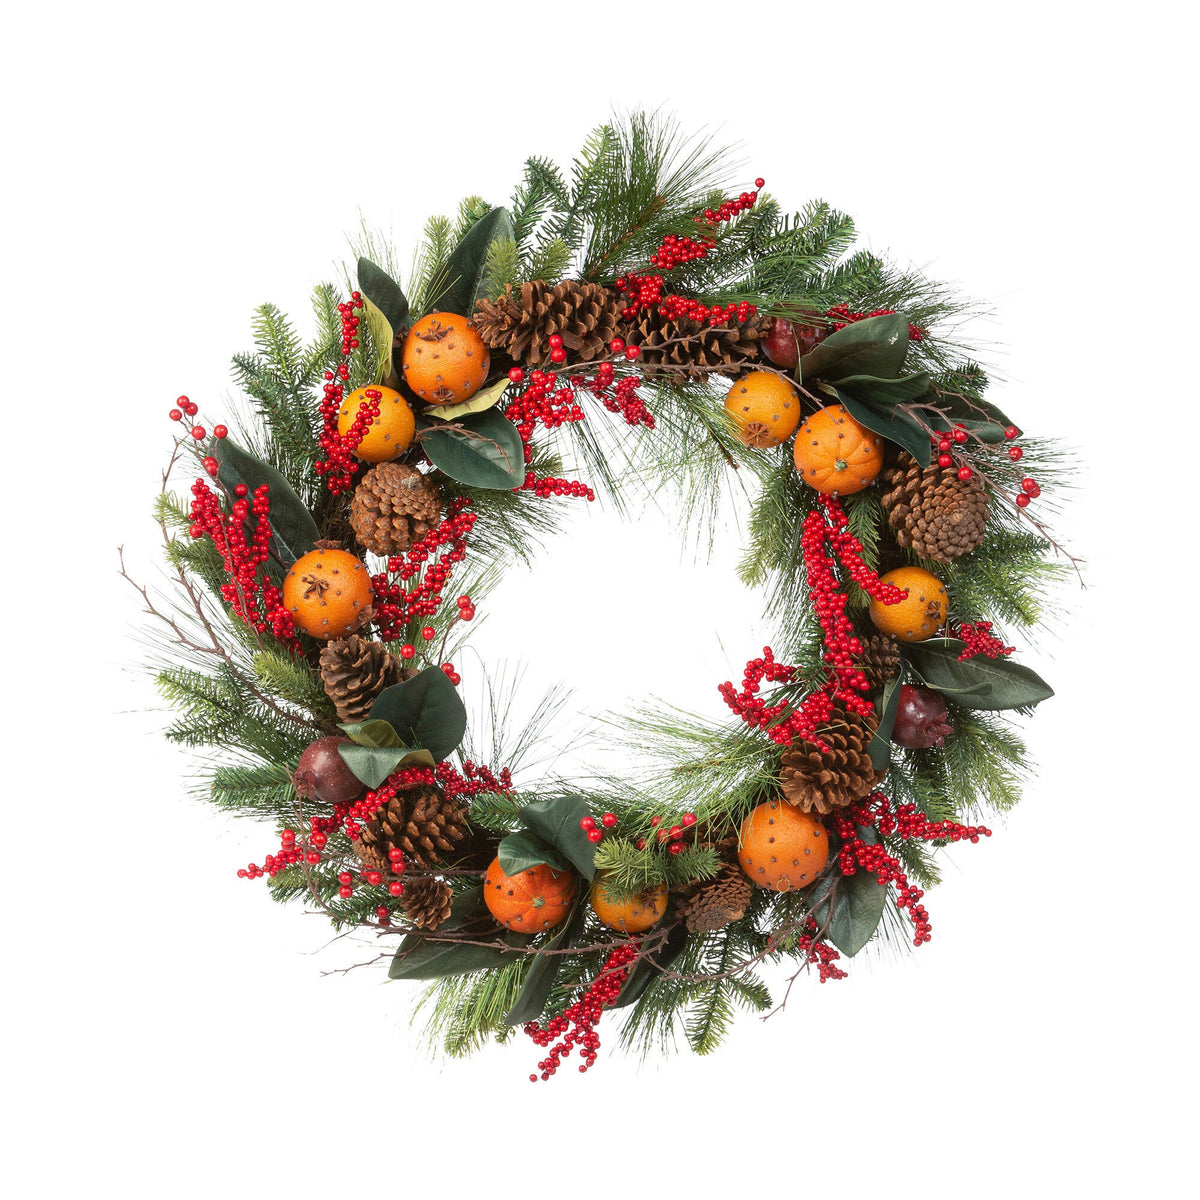 Cloved Fruit and Pine Wreath 24"